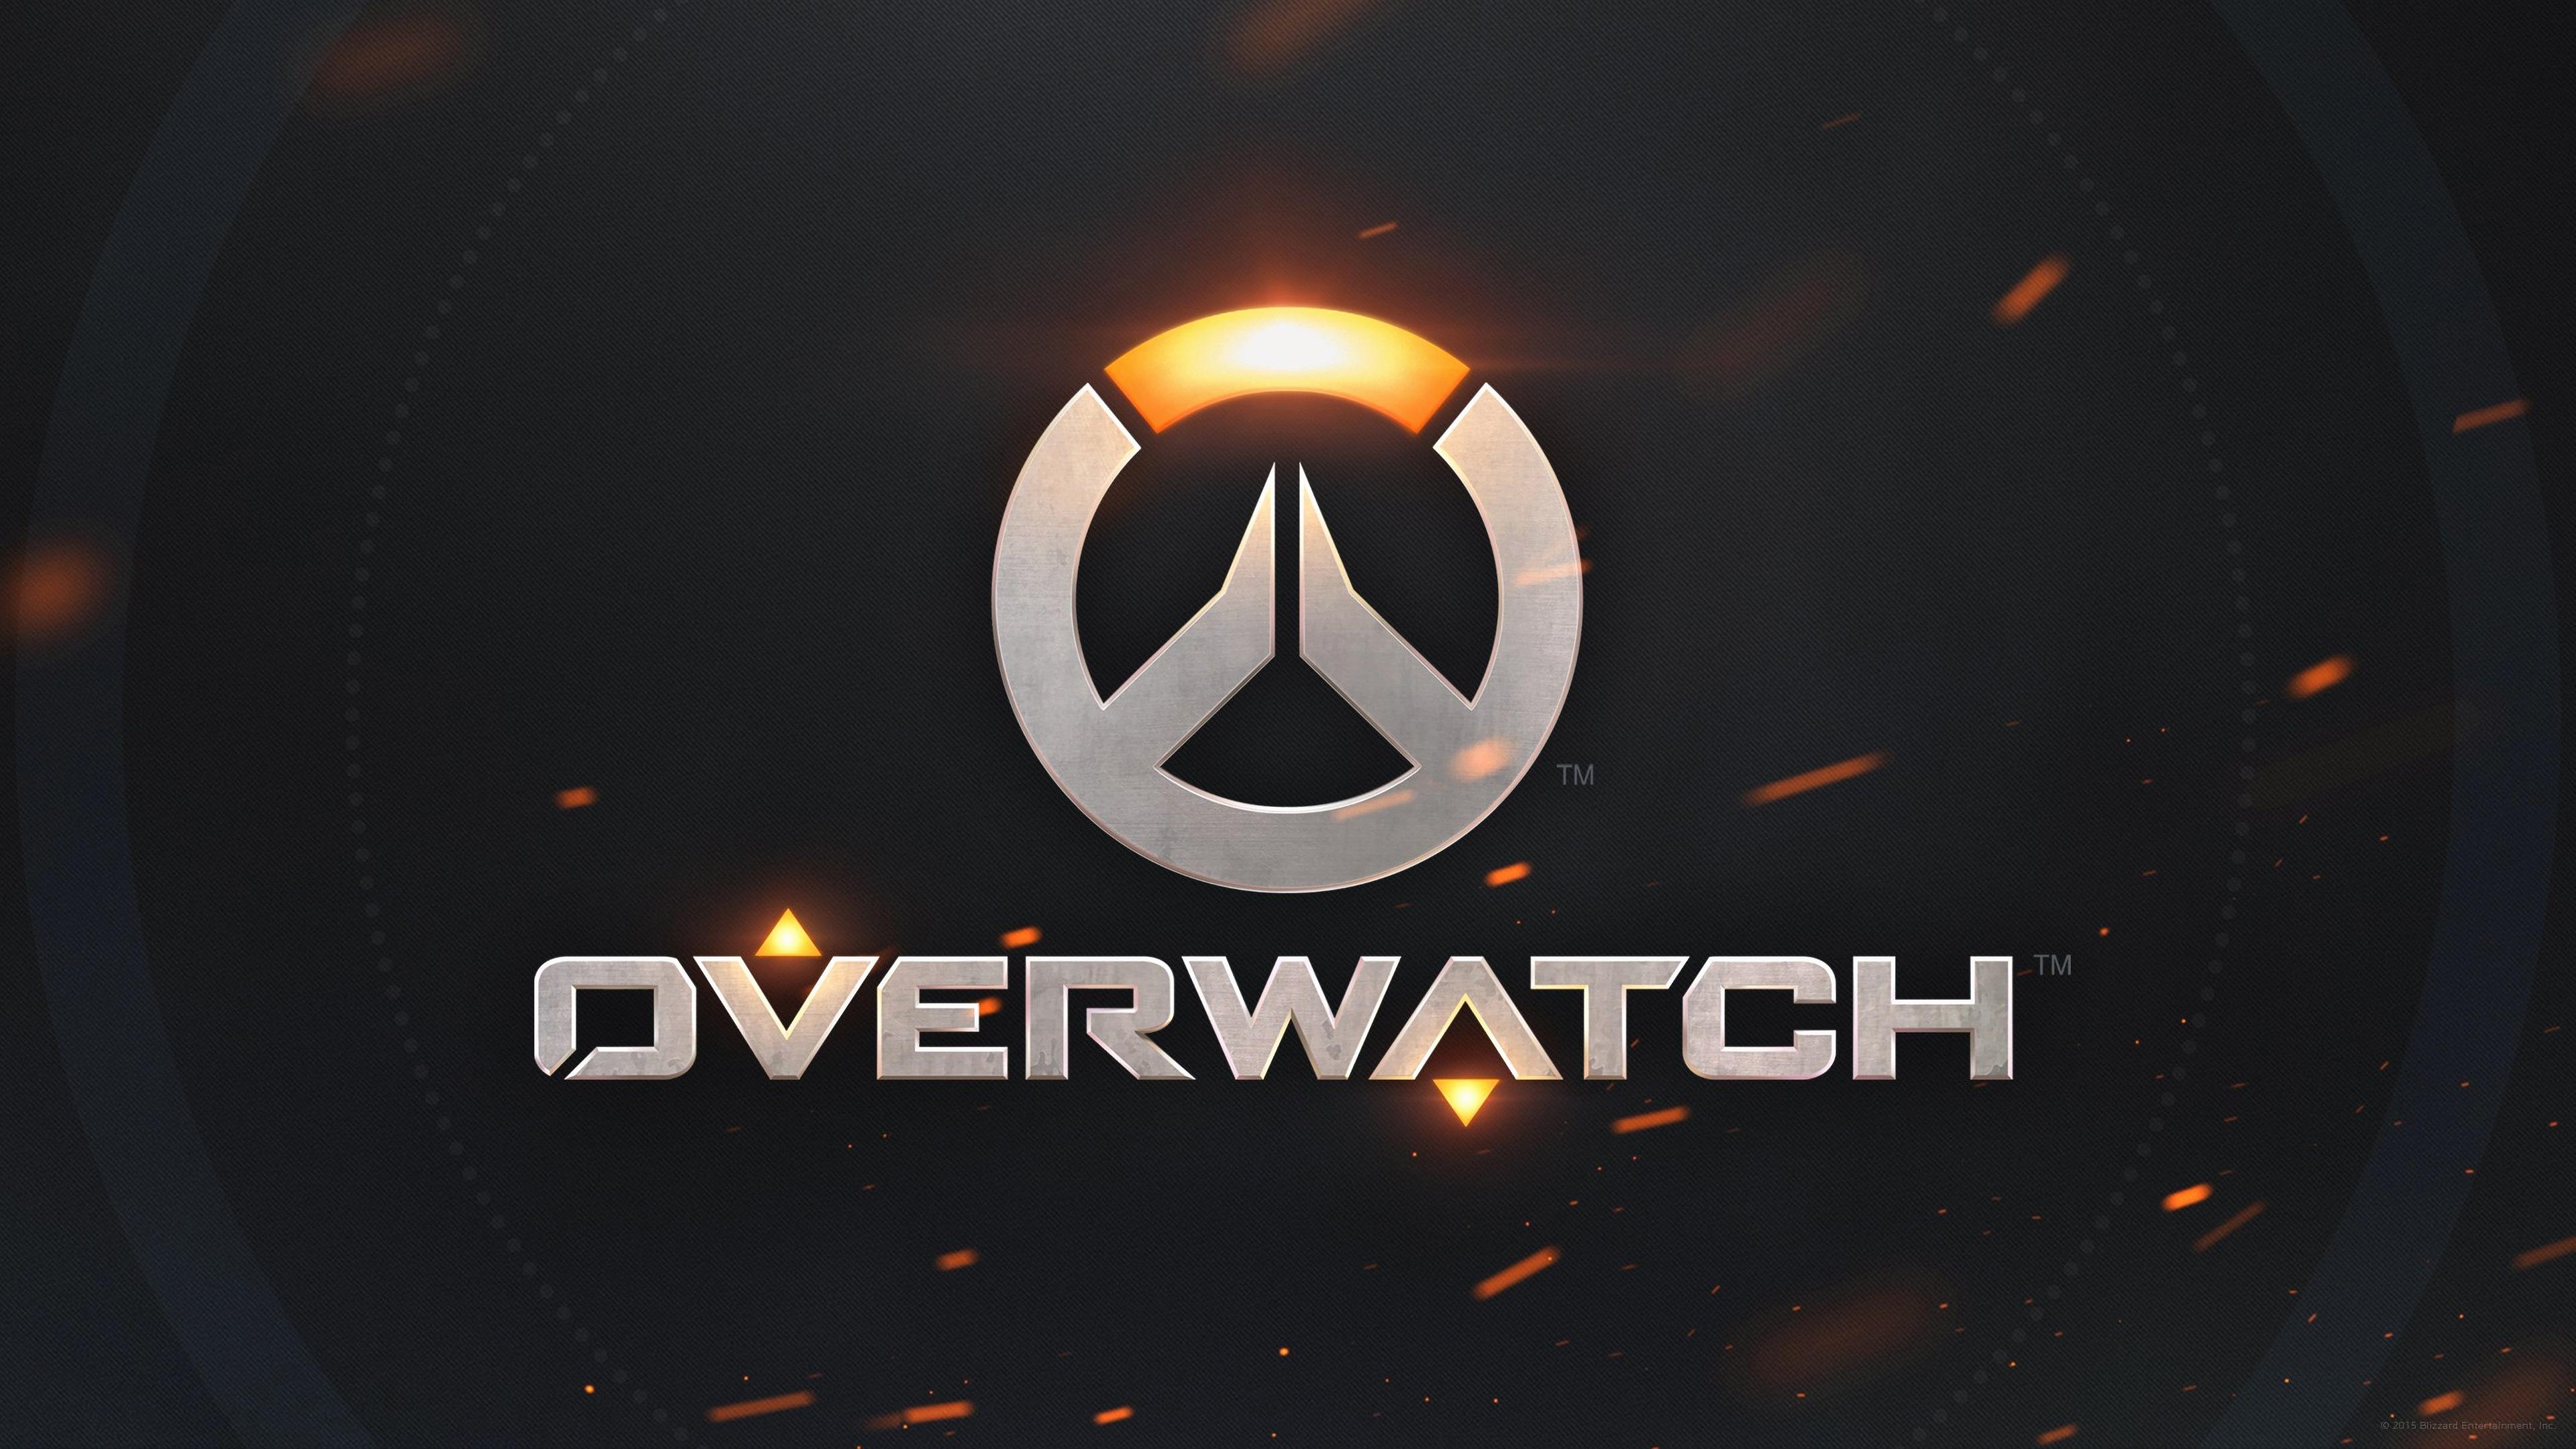 Awesome Wallpapers Hd For Android - Overwatch Logo Hd , HD Wallpaper & Backgrounds